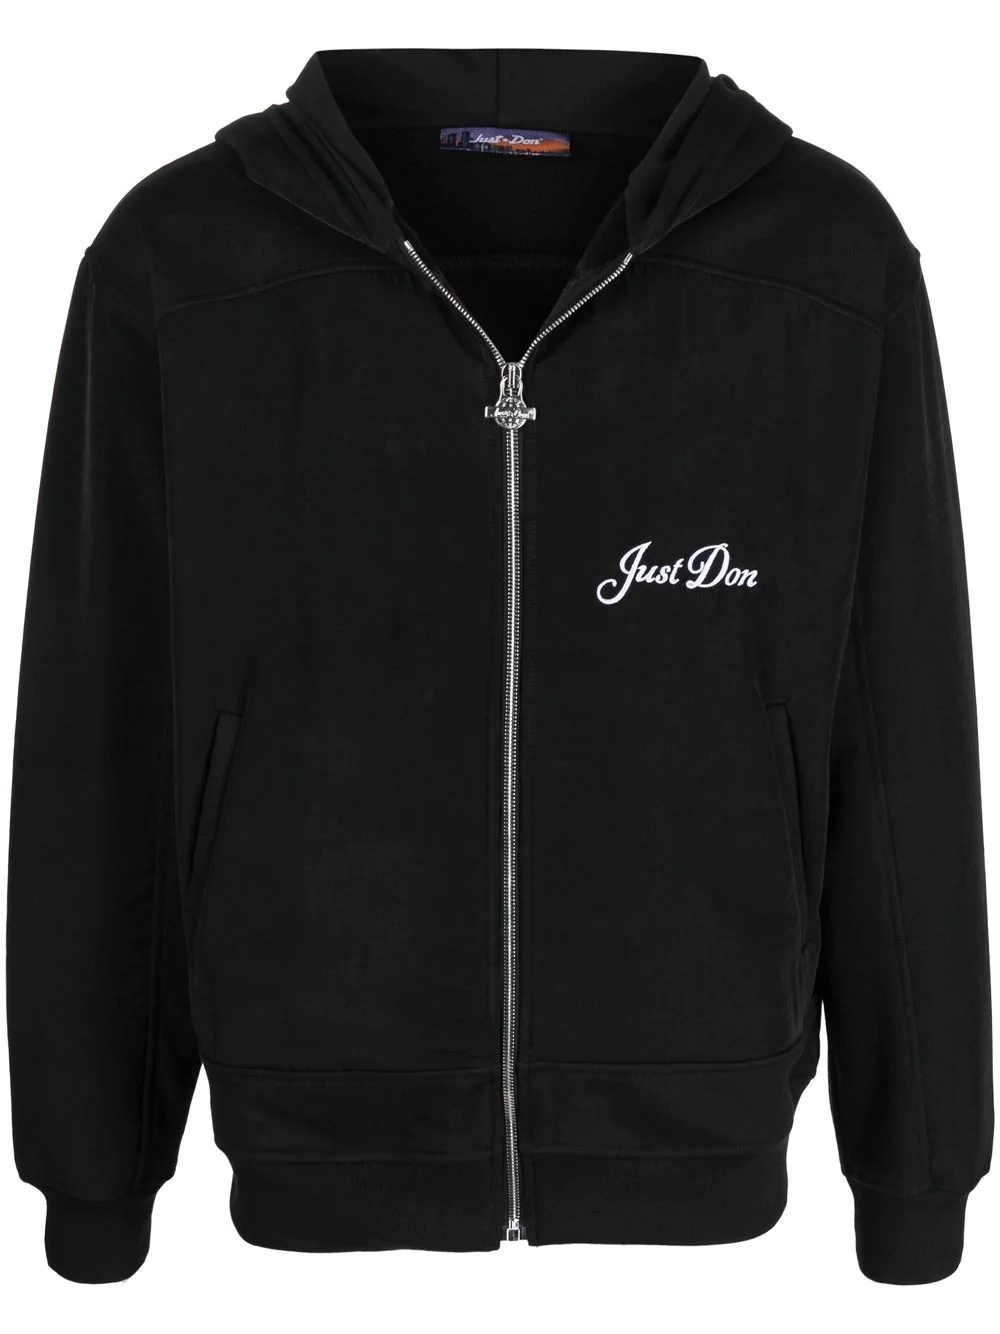 embroidered-logo zip-up hoodie - 2